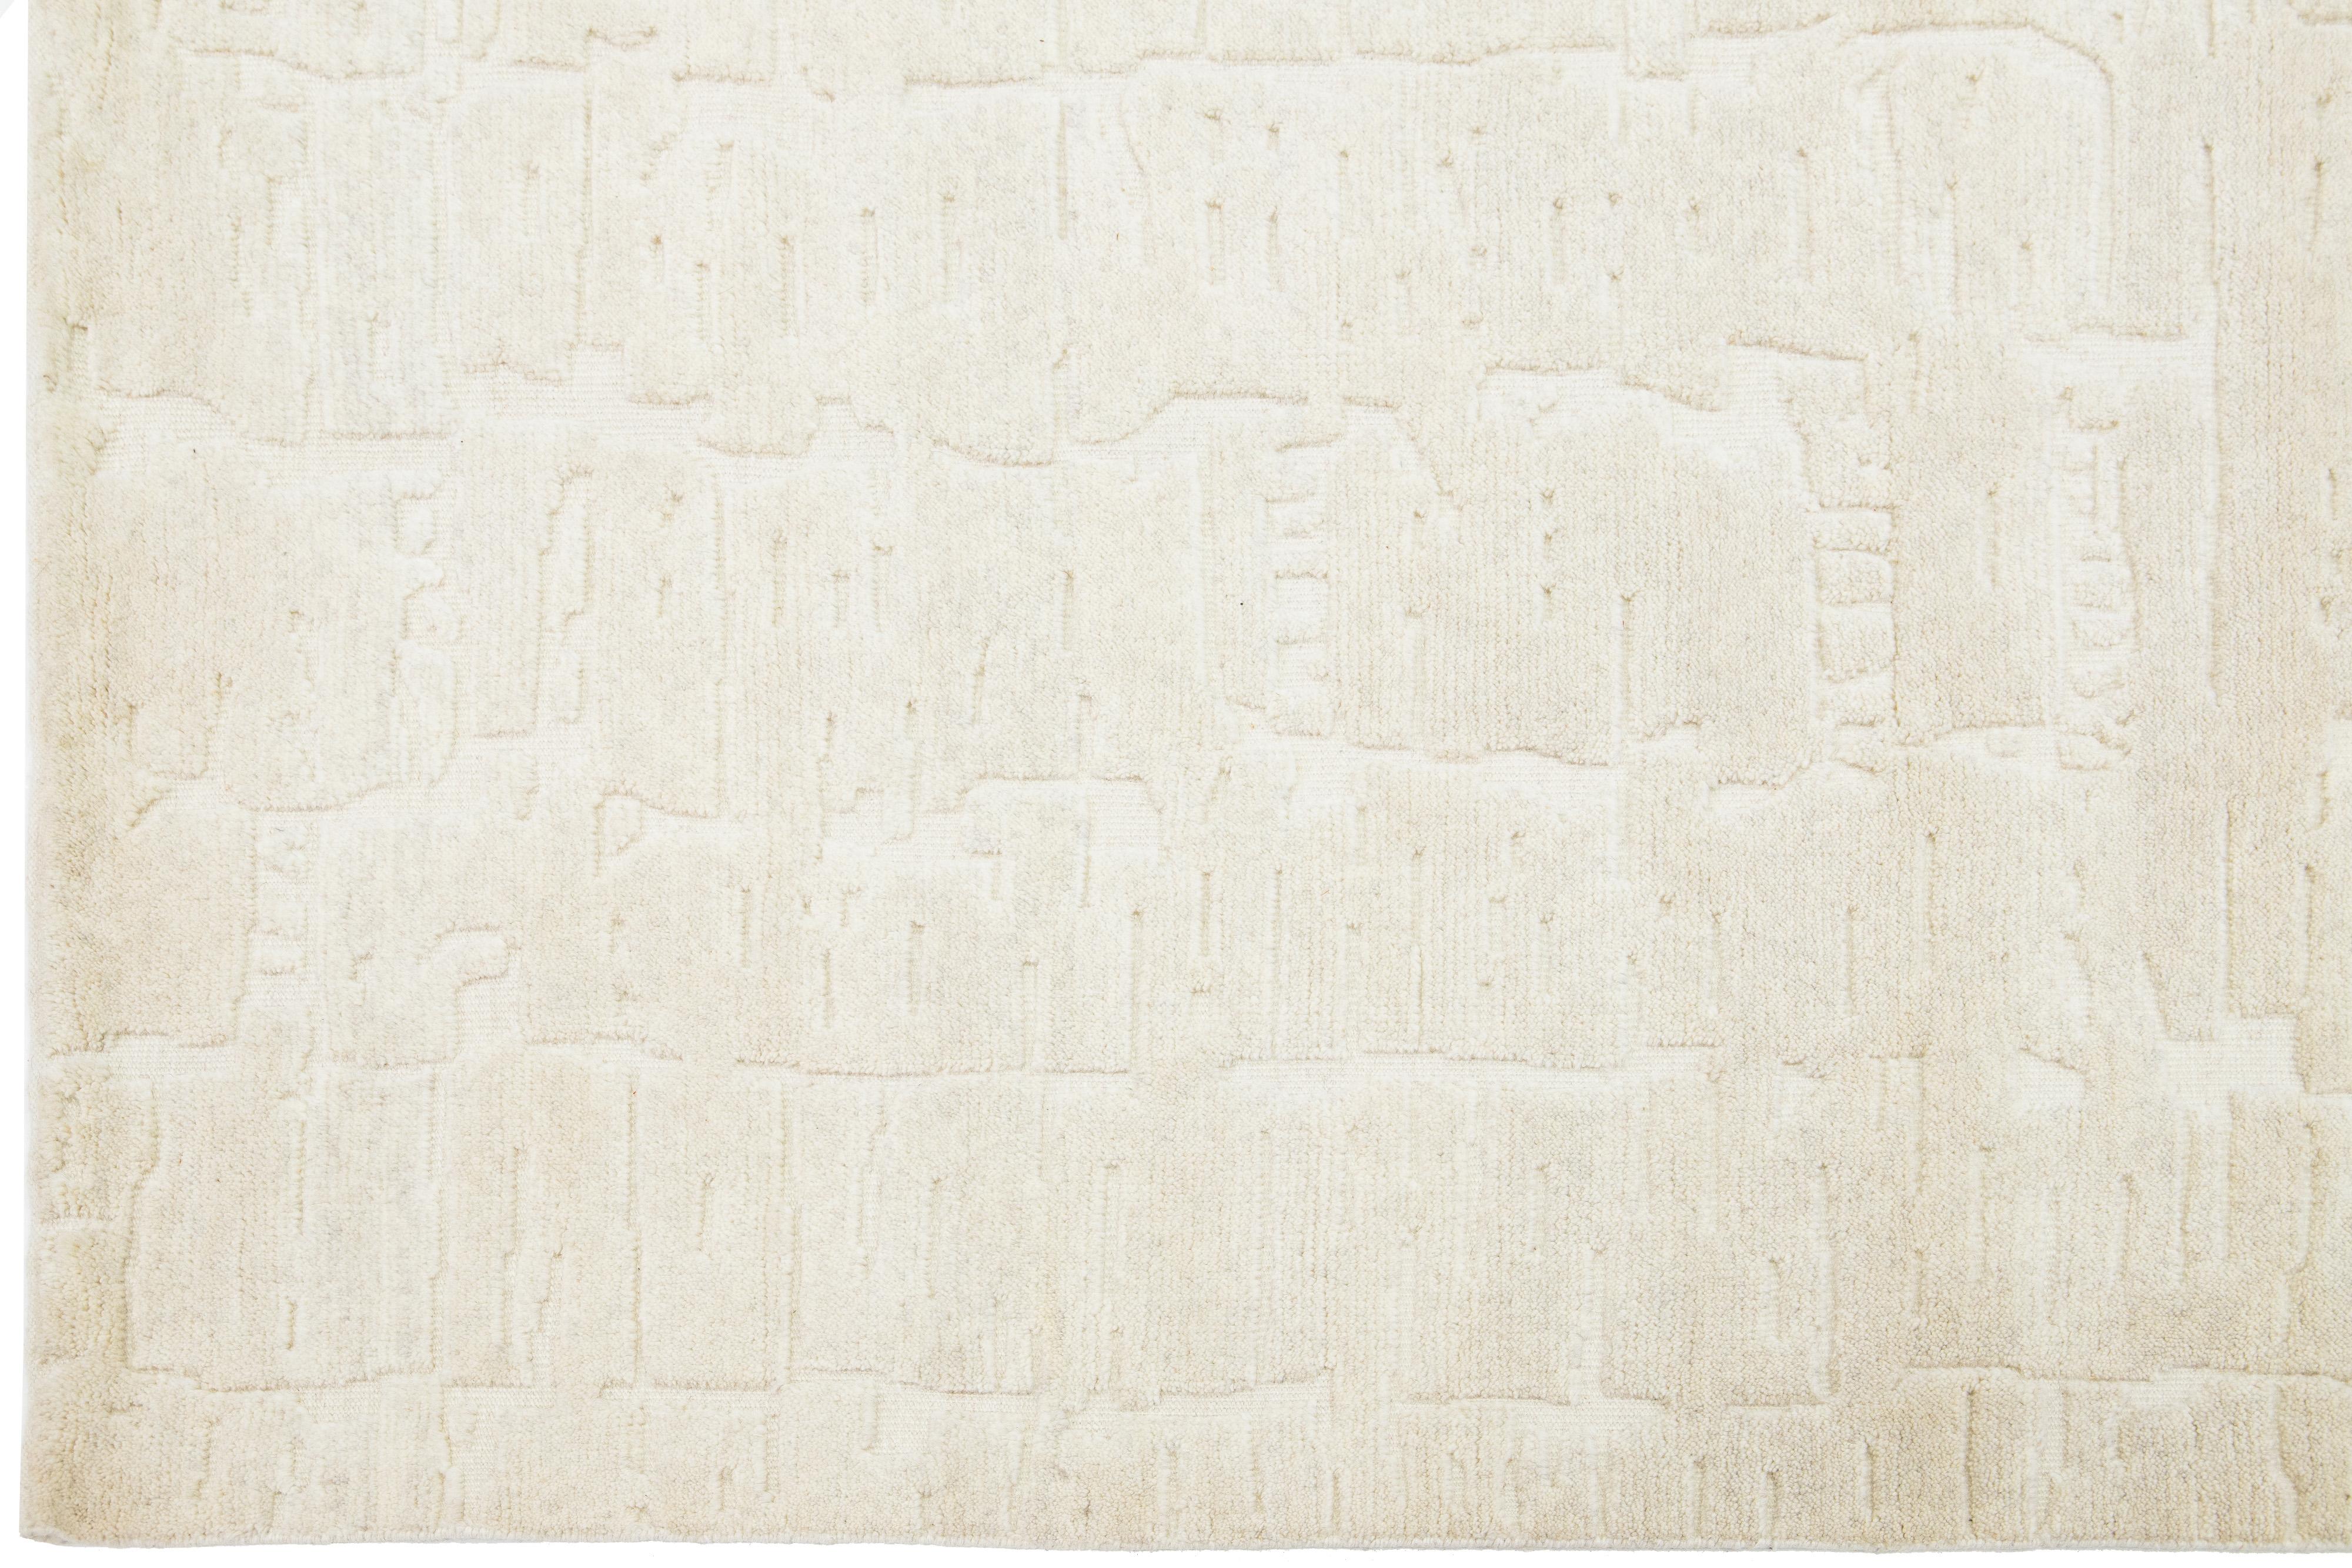 Minimalist Contemporary Moroccan Style Wool Rug In ivory by Apadana  In New Condition For Sale In Norwalk, CT